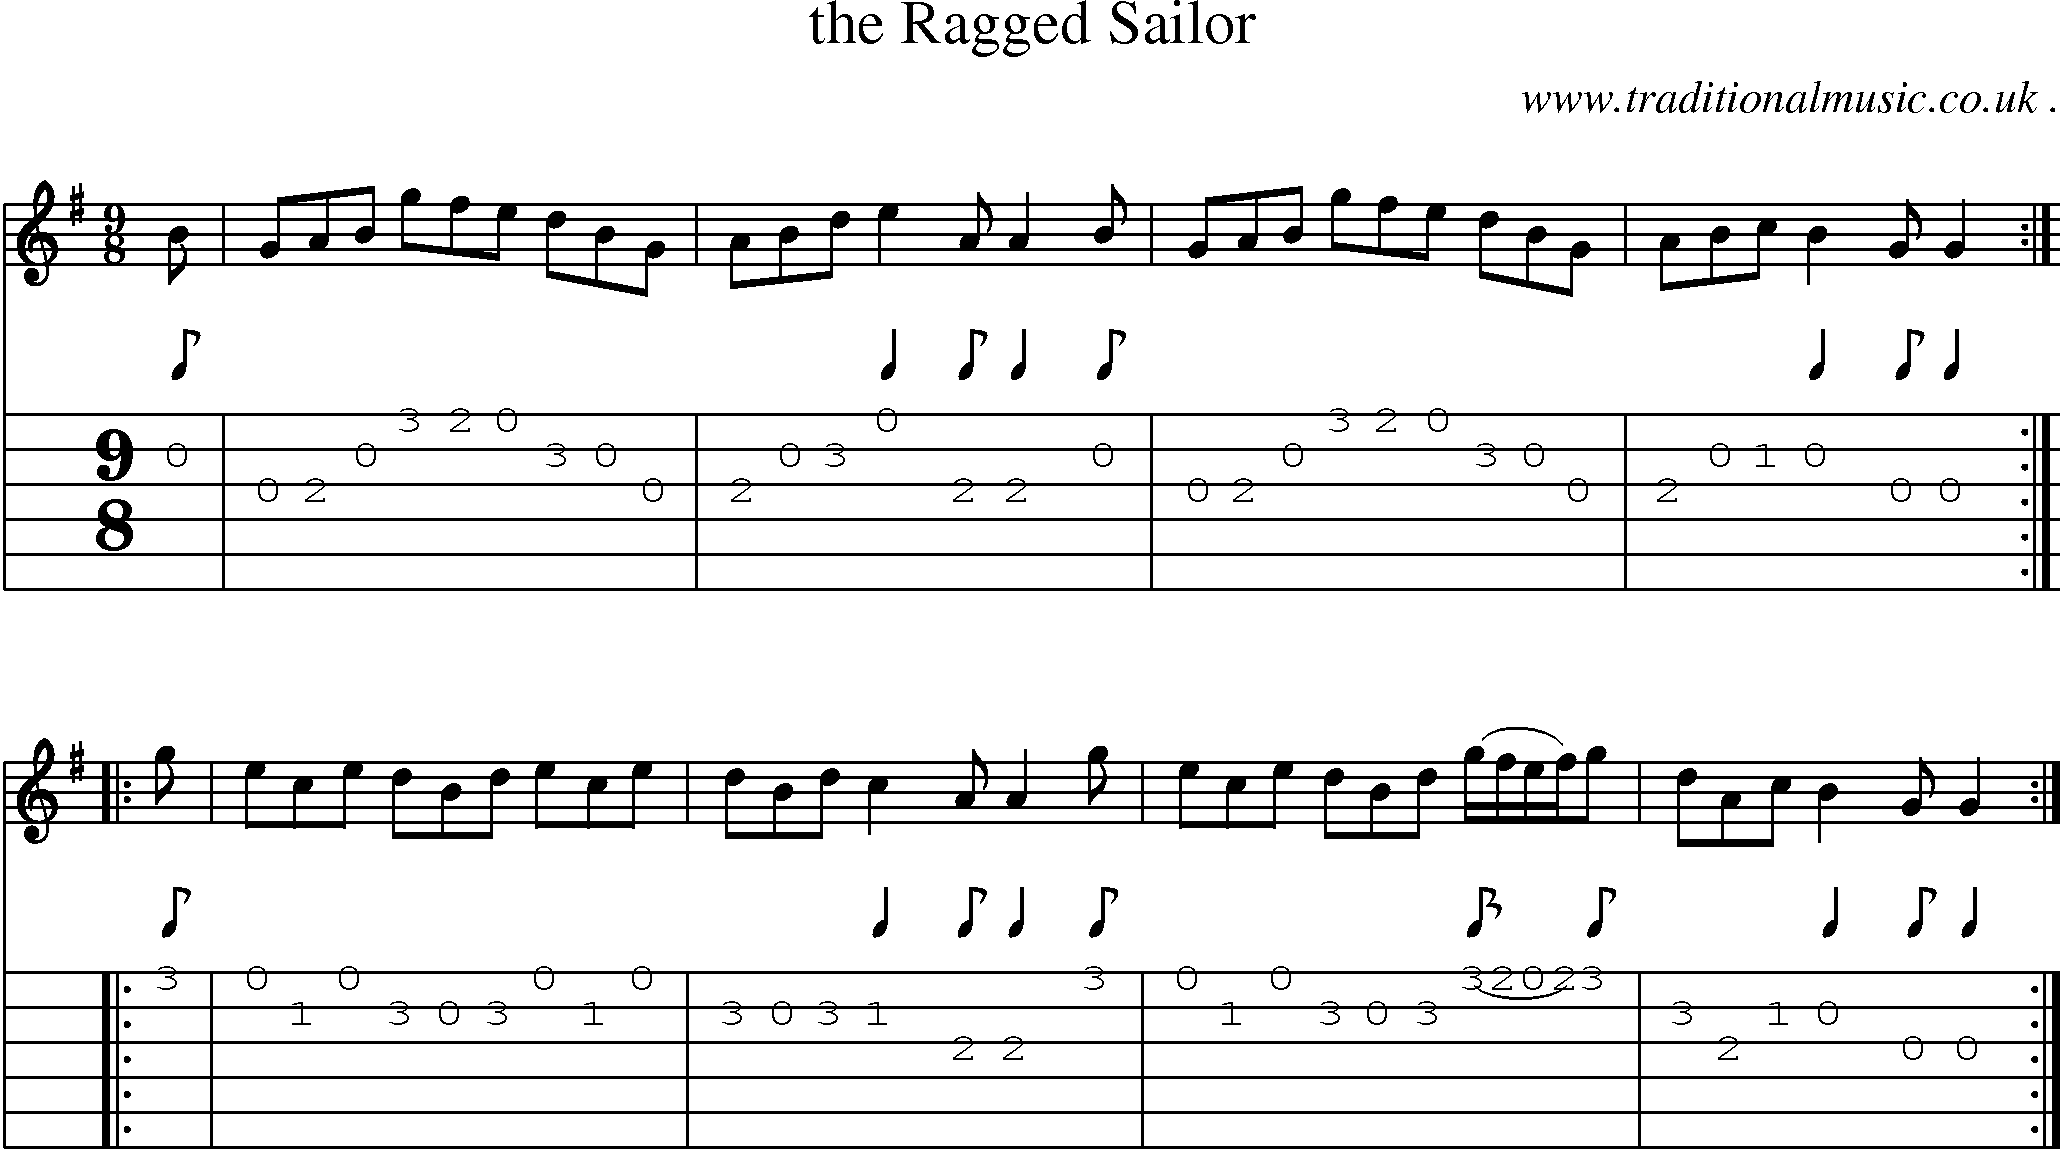 Sheet-Music and Guitar Tabs for The Ragged Sailor